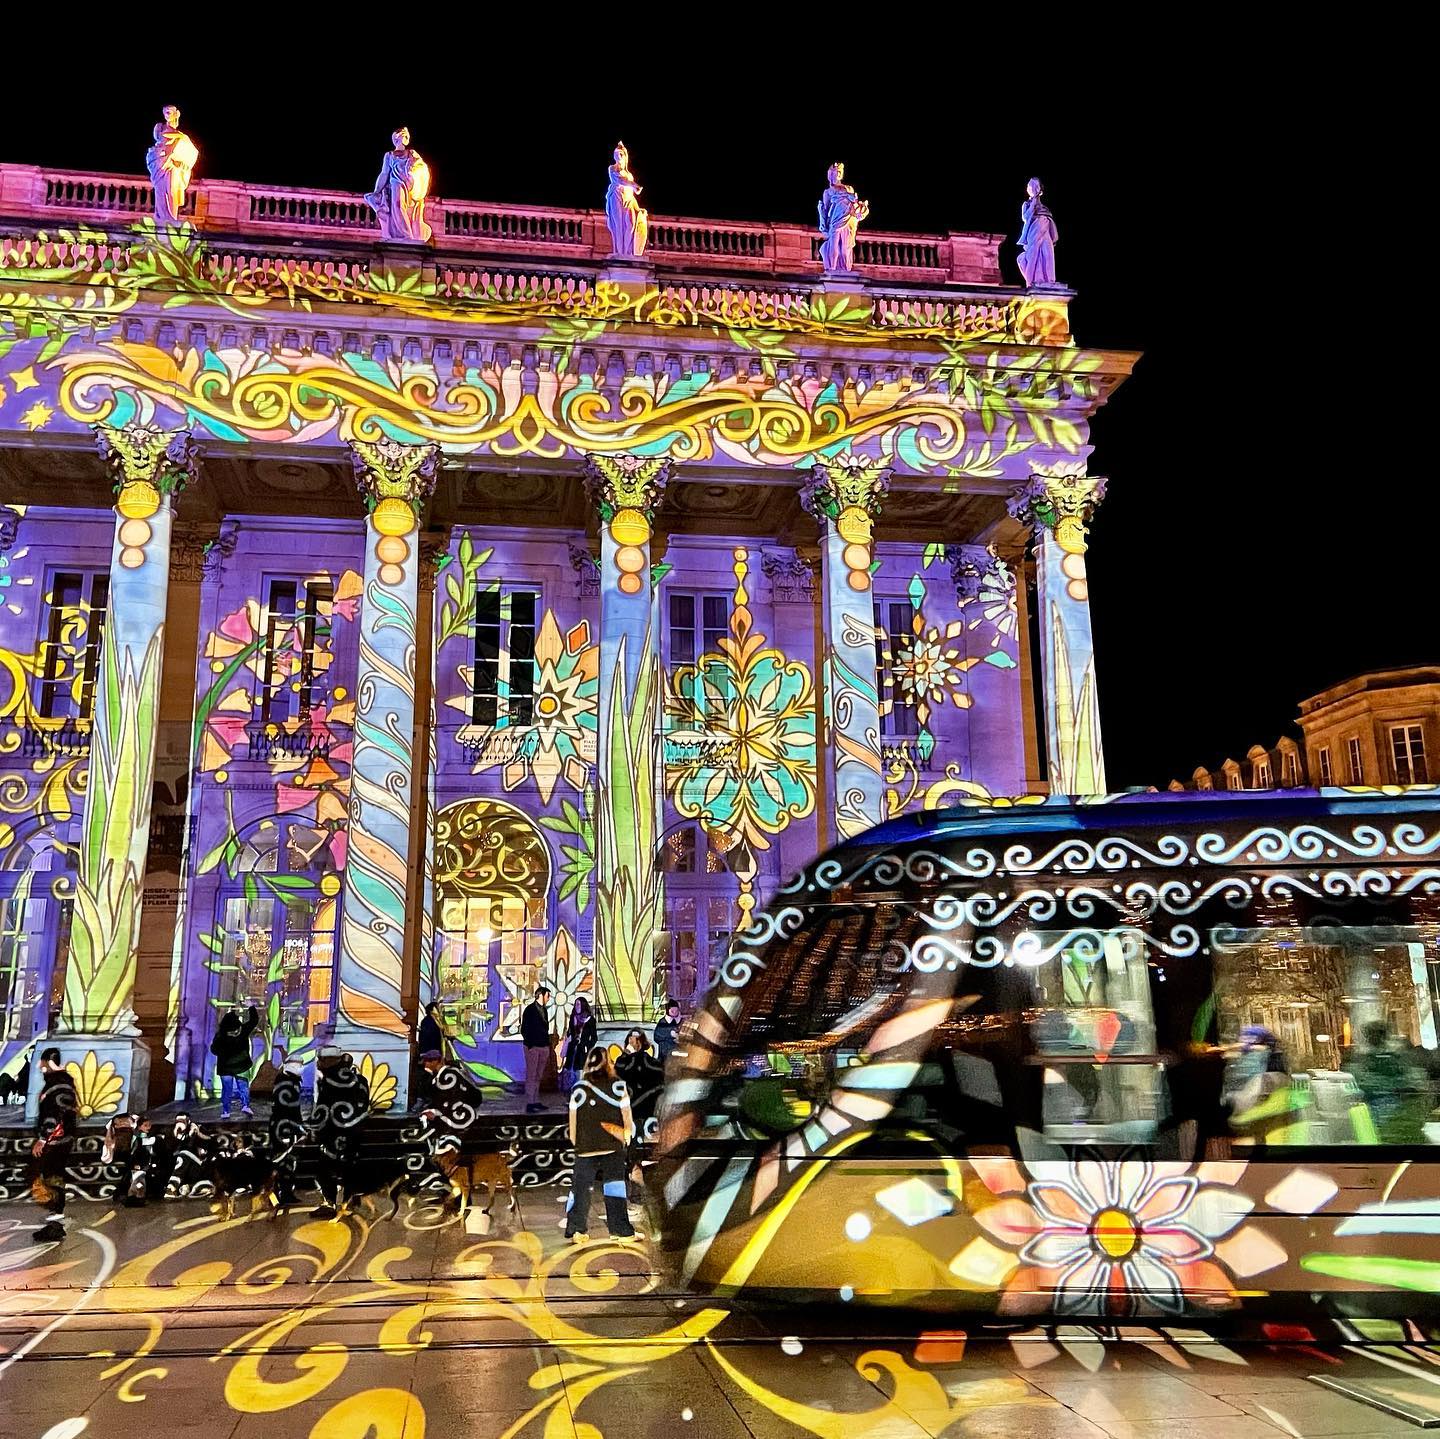 spectacle noel bordeaux projection lumineuse grand theatre place comedie